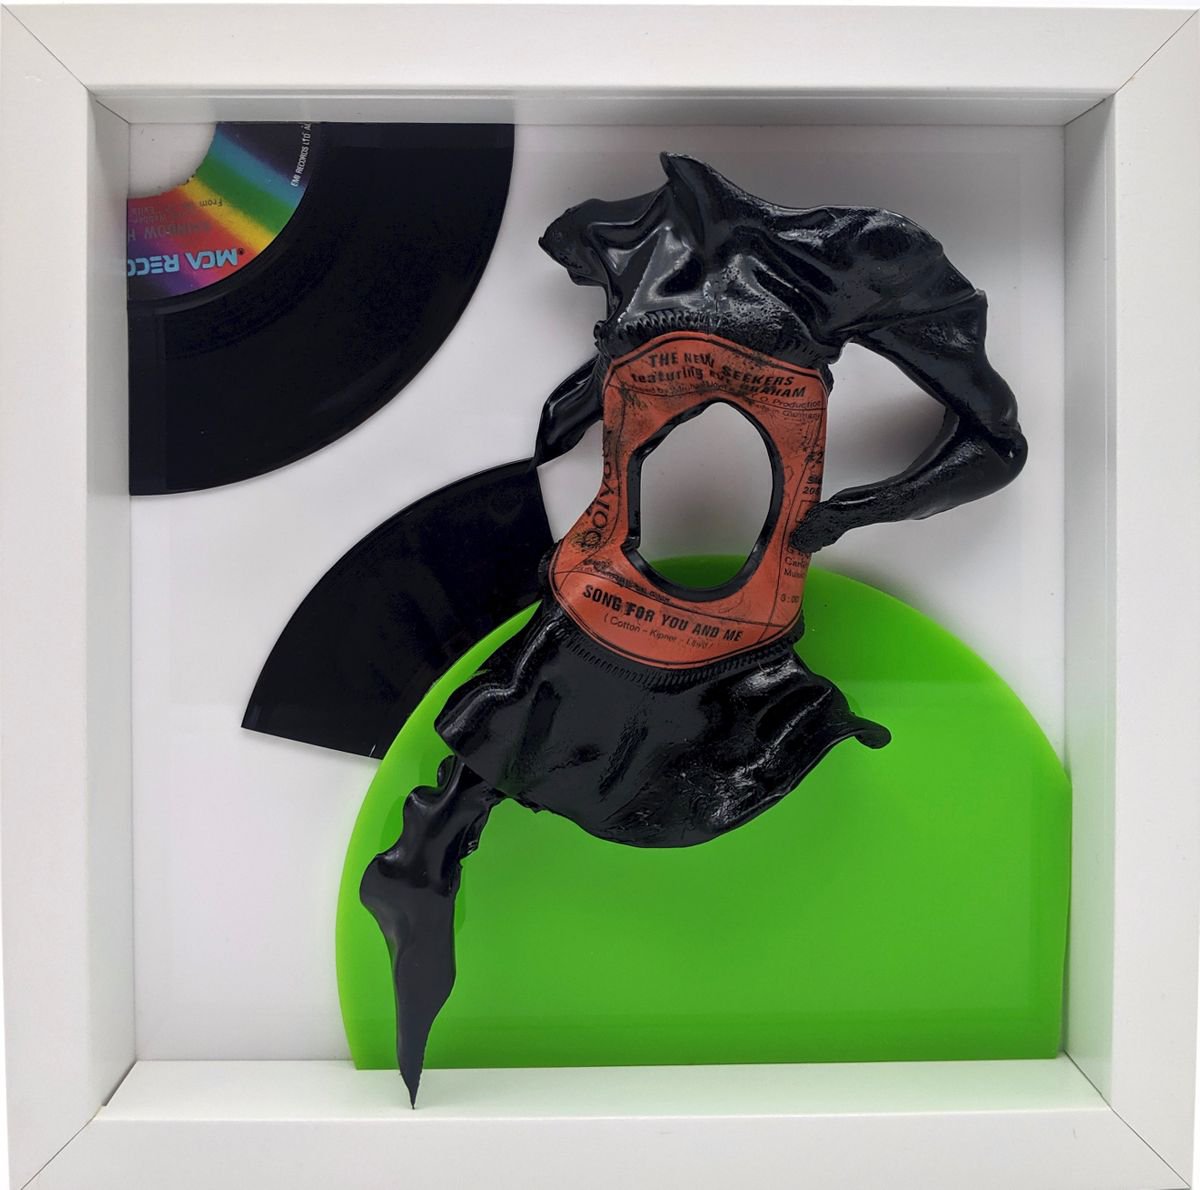 Vinyl Music Record Sculpture - Song for You and Me by Seona Mason